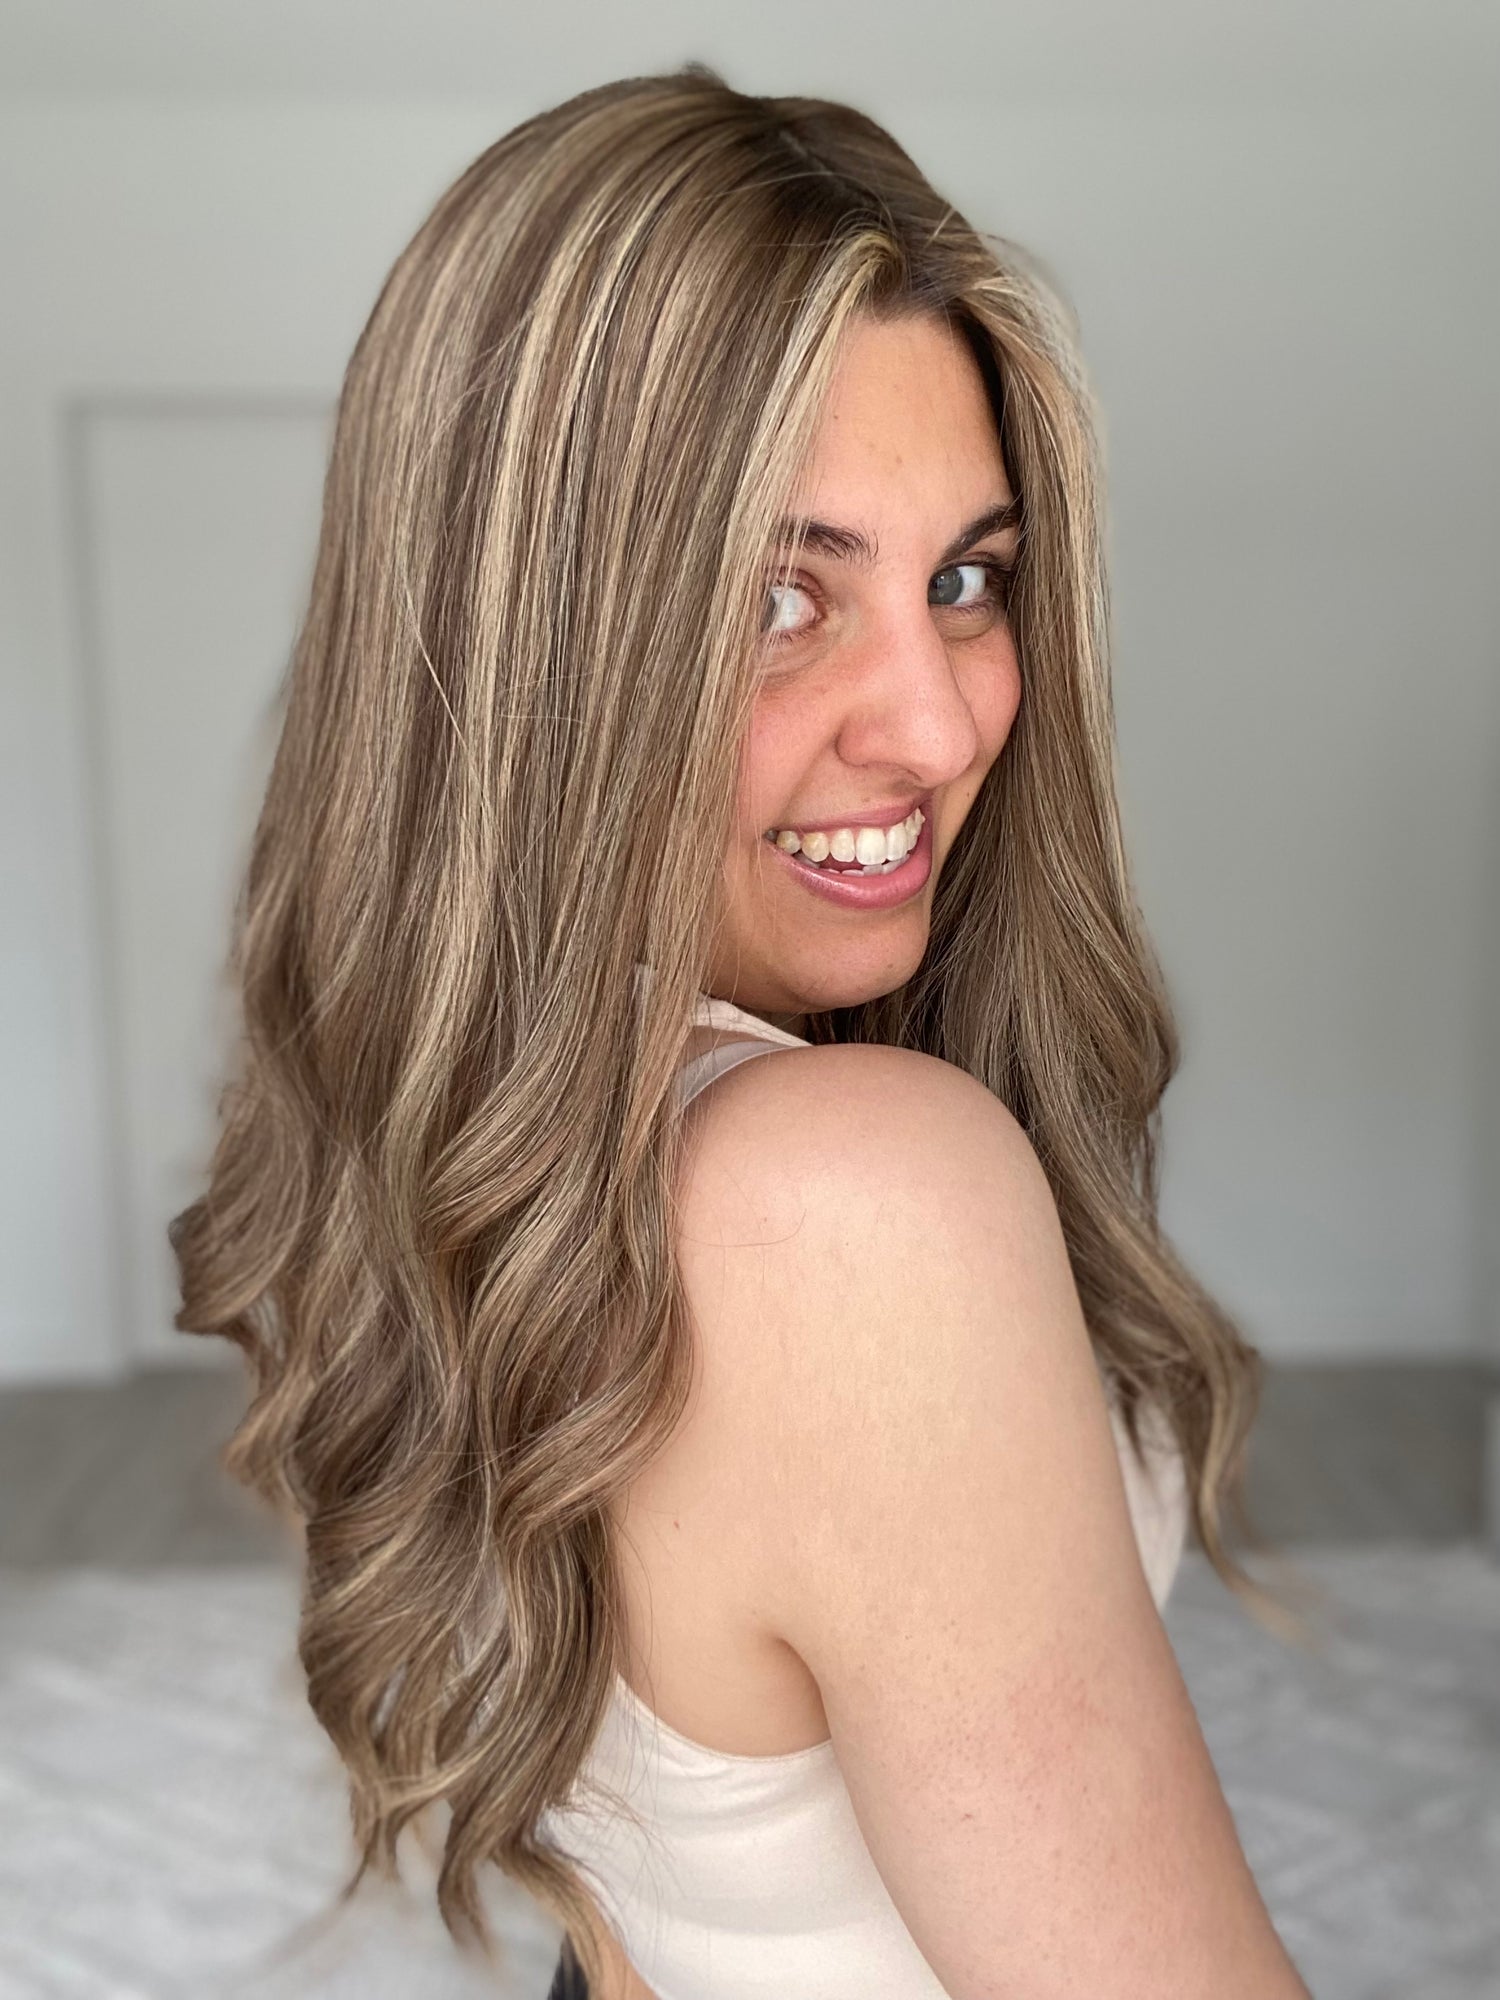 Dimensional Bronde 9x9 22 Inches Topper